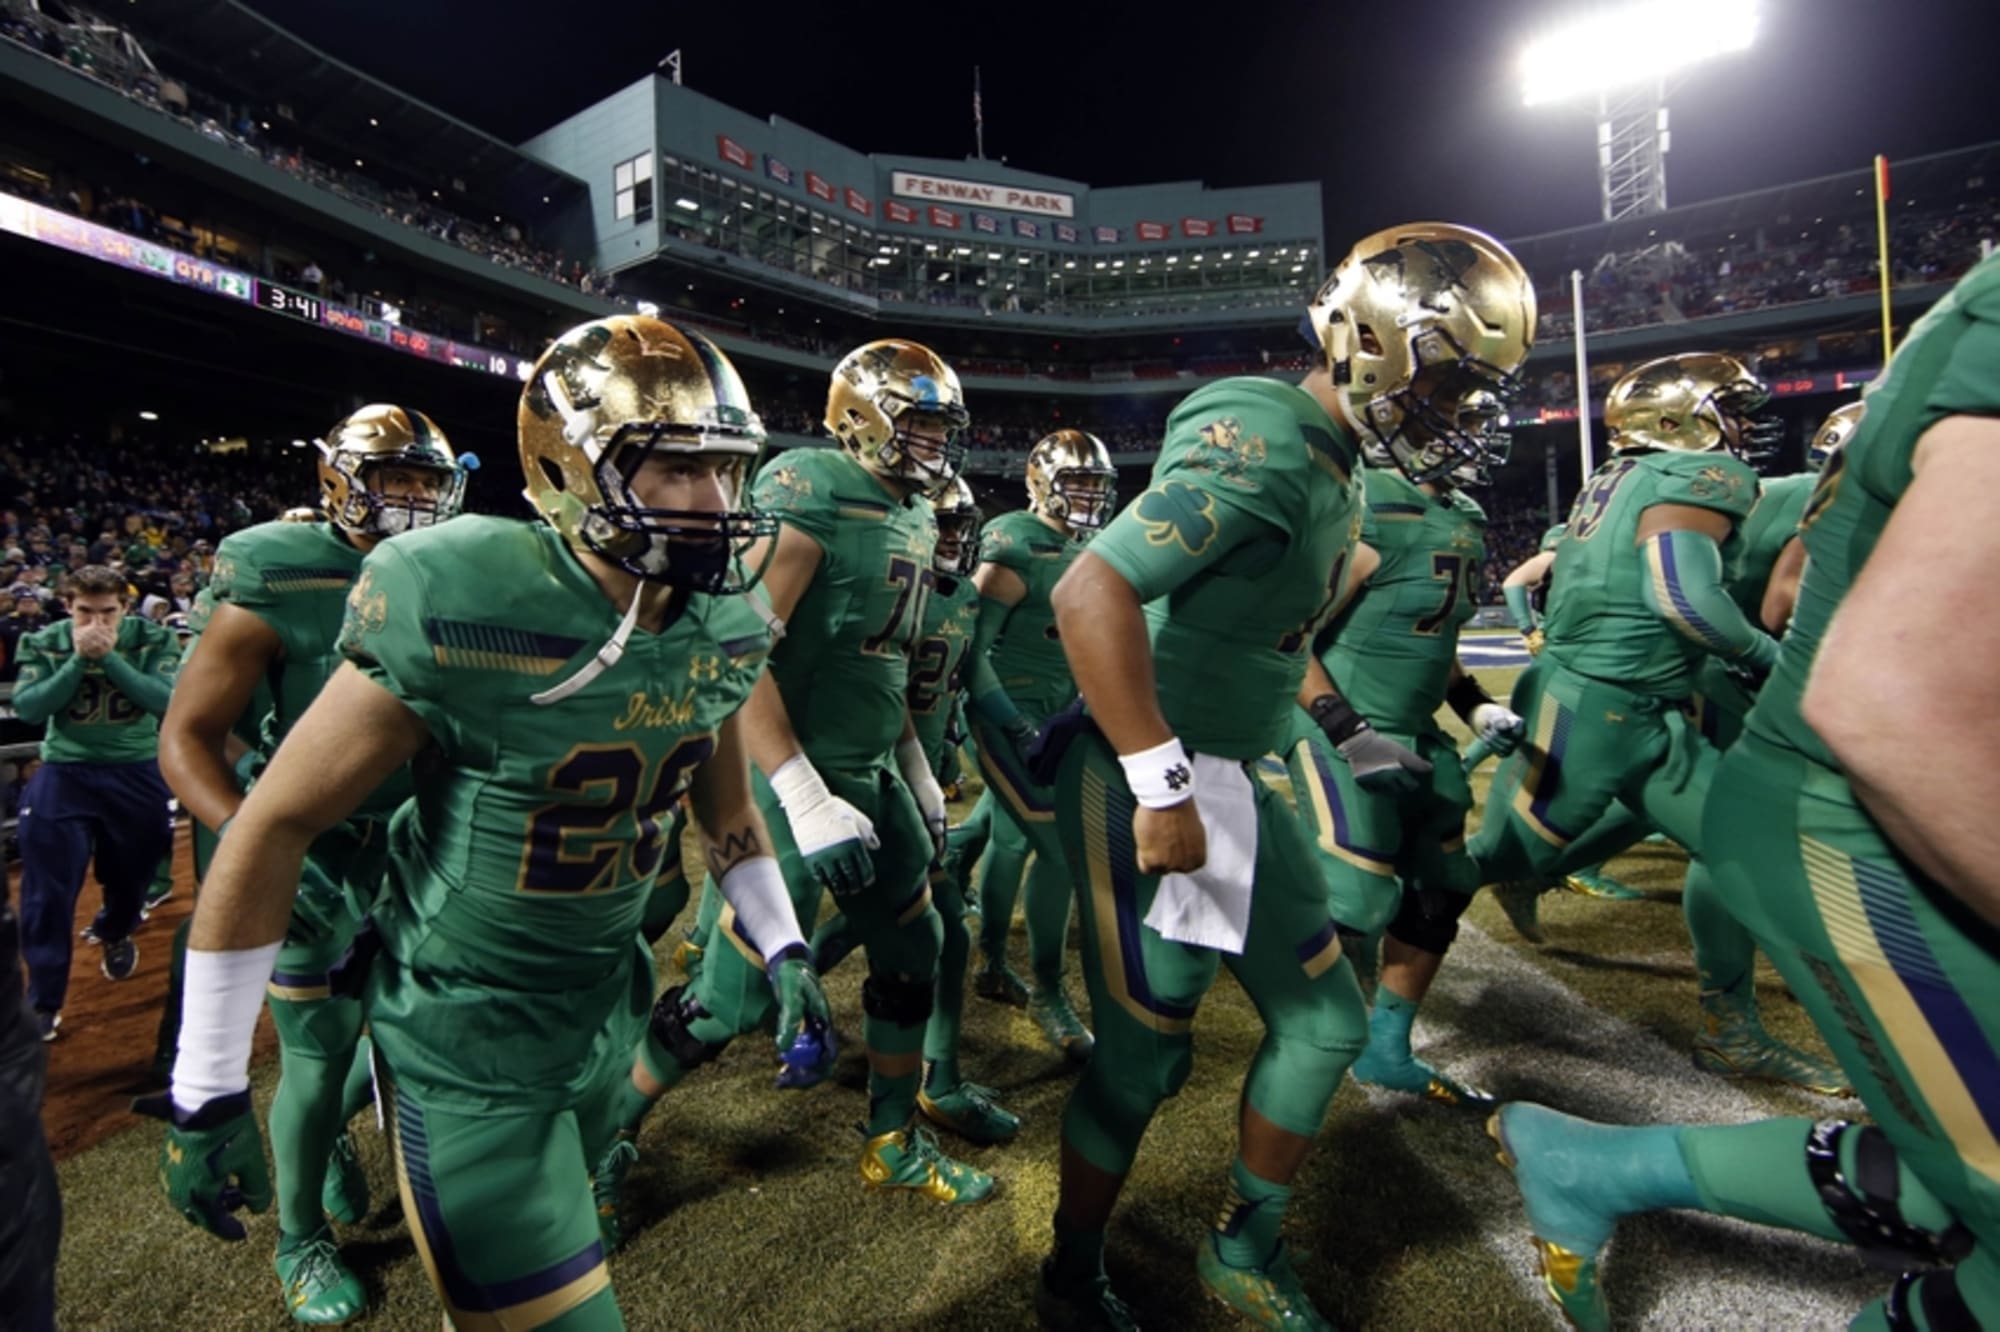 What the Green Machine Jerseys Mean to Notre Dame